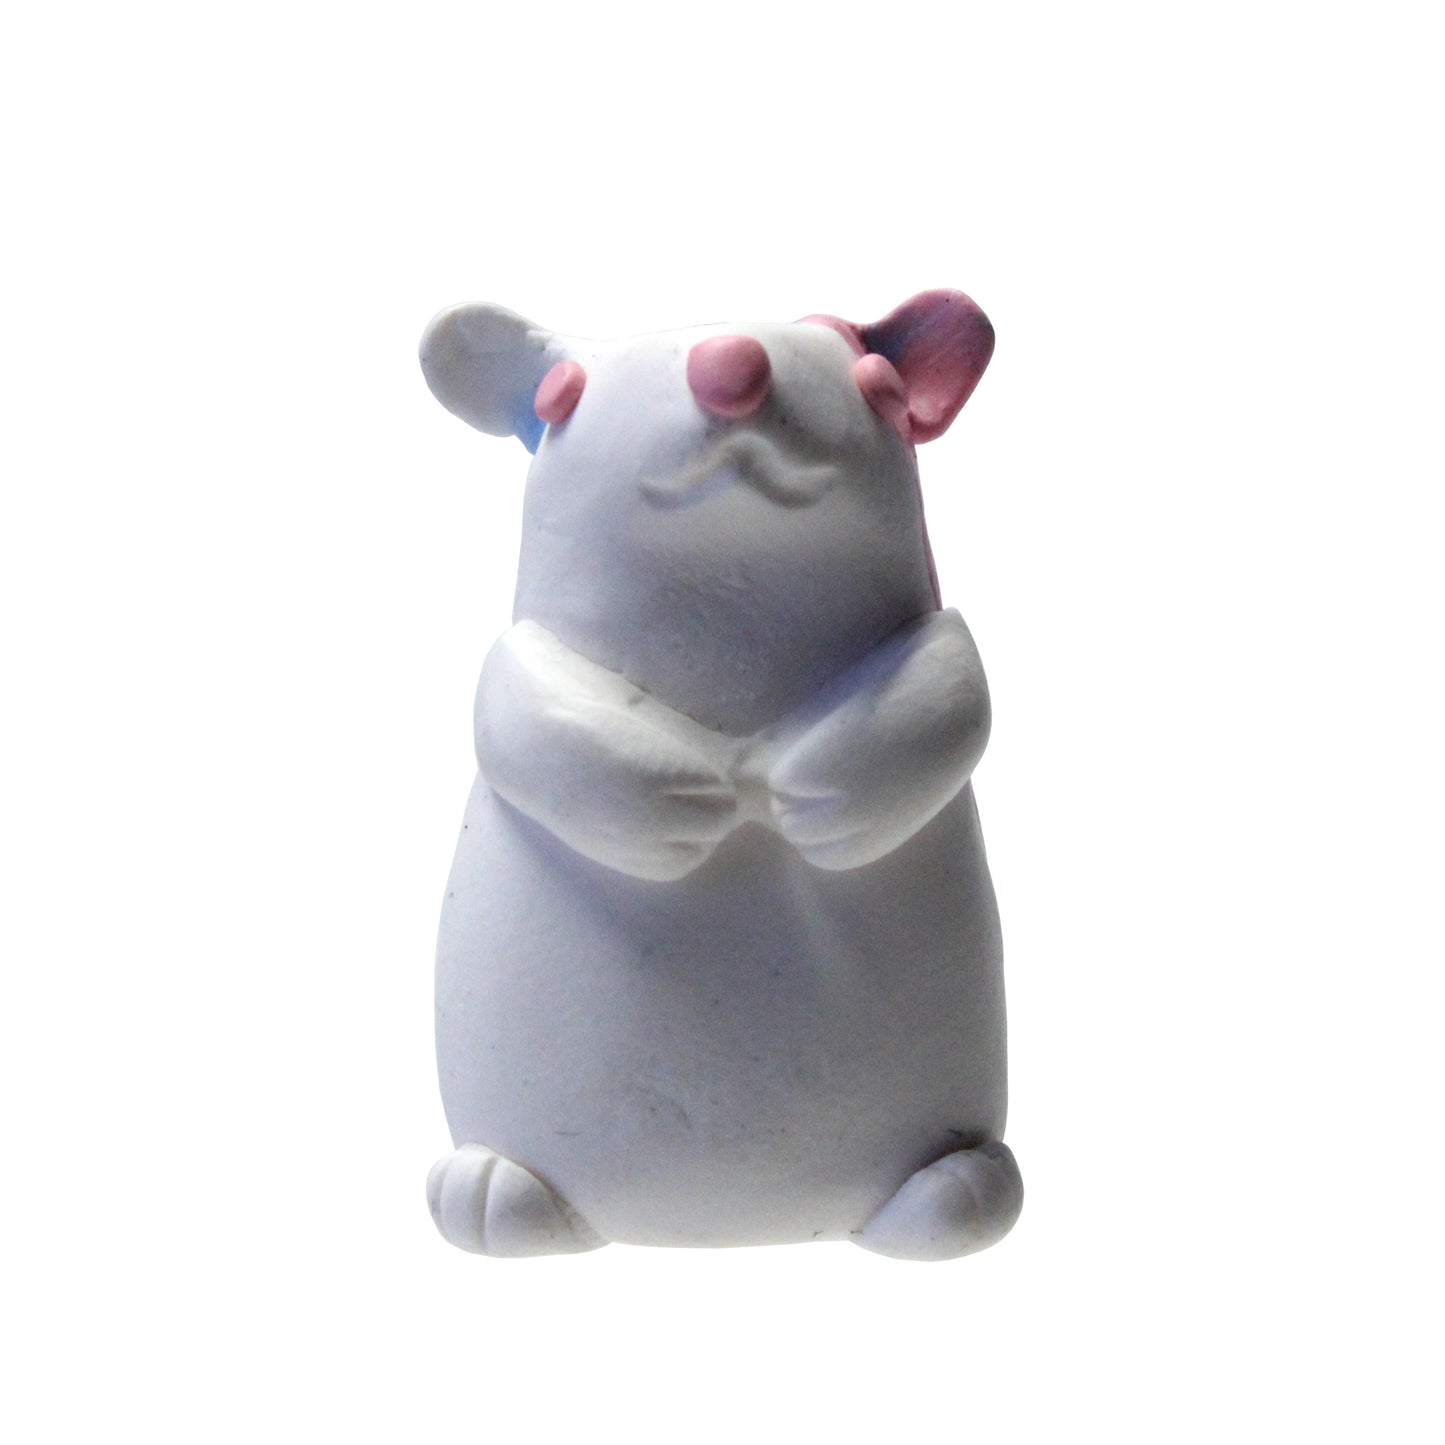 BUBBLEGUM Hamster / hand sculpted polymer clay / choose from figurine, charm or keychain